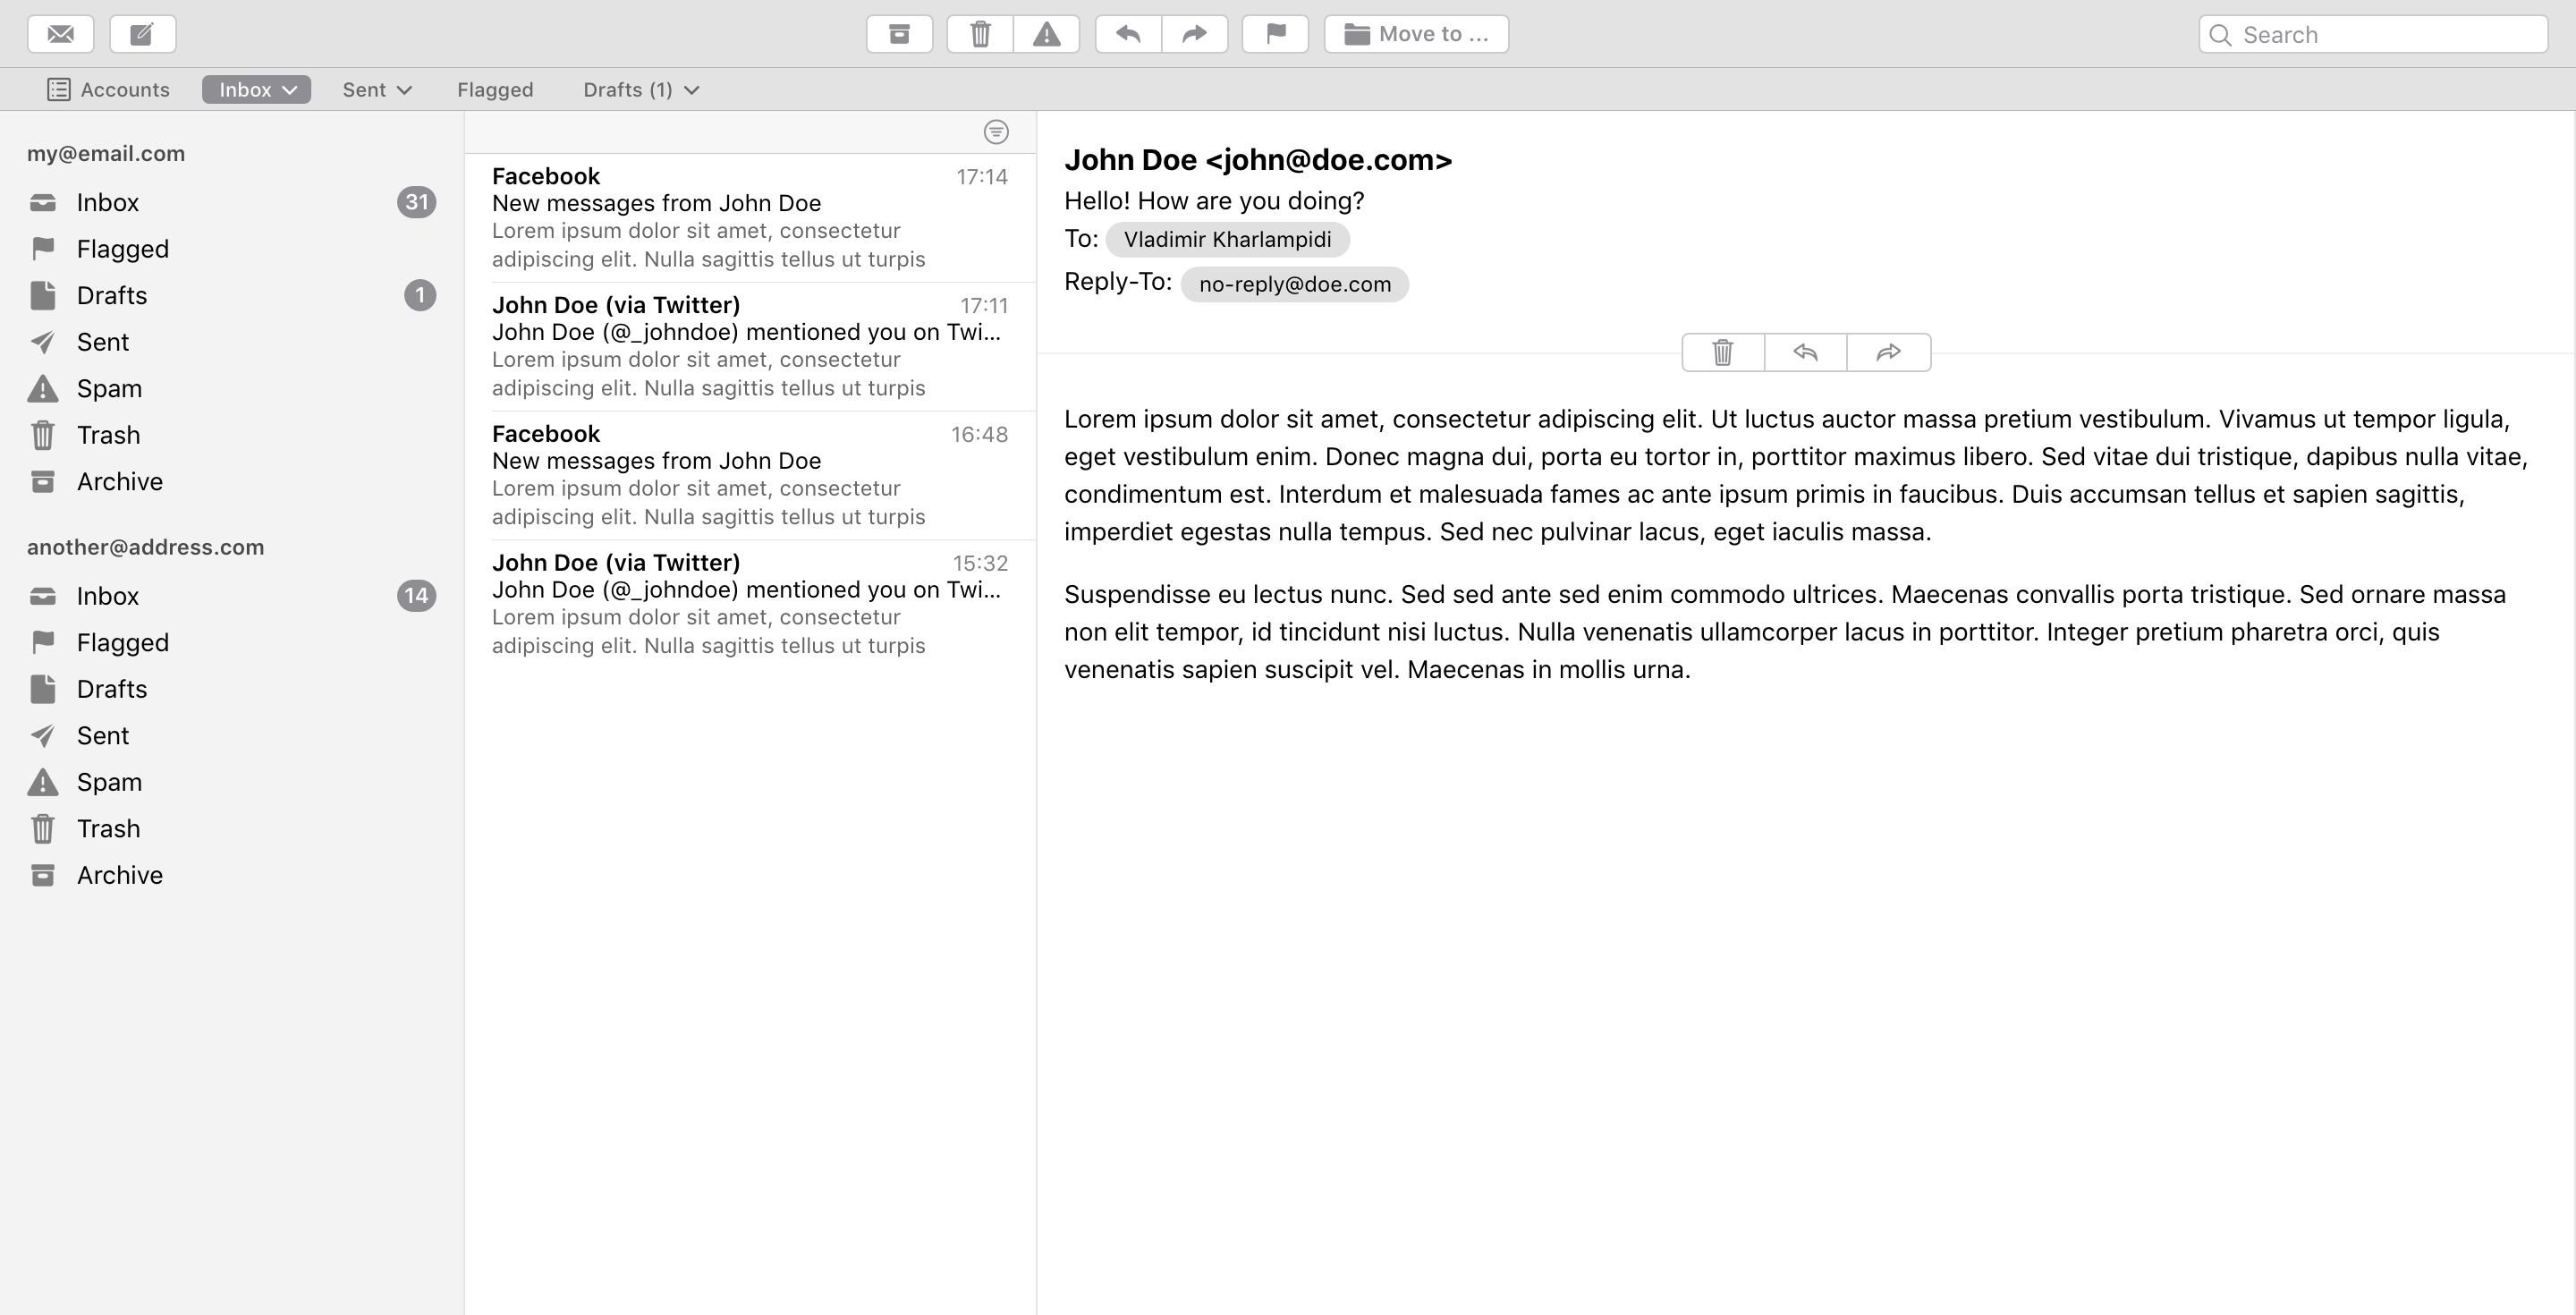 macOs Mail app with two Appbars on top